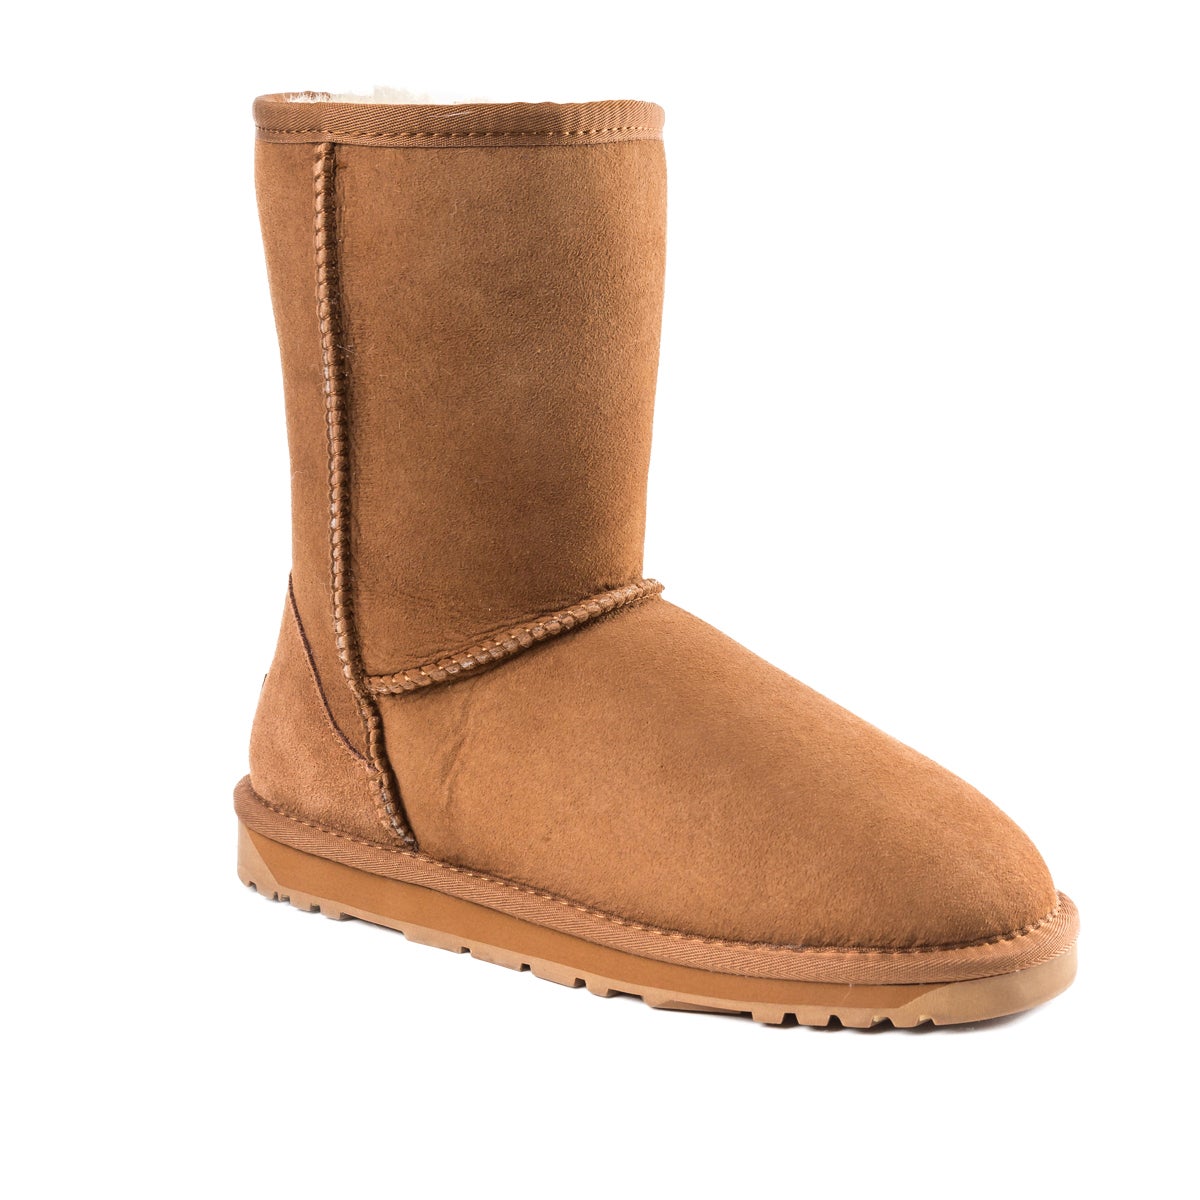 Ugg Classic Short Boots (Water Resistant) Ozwear Ugg